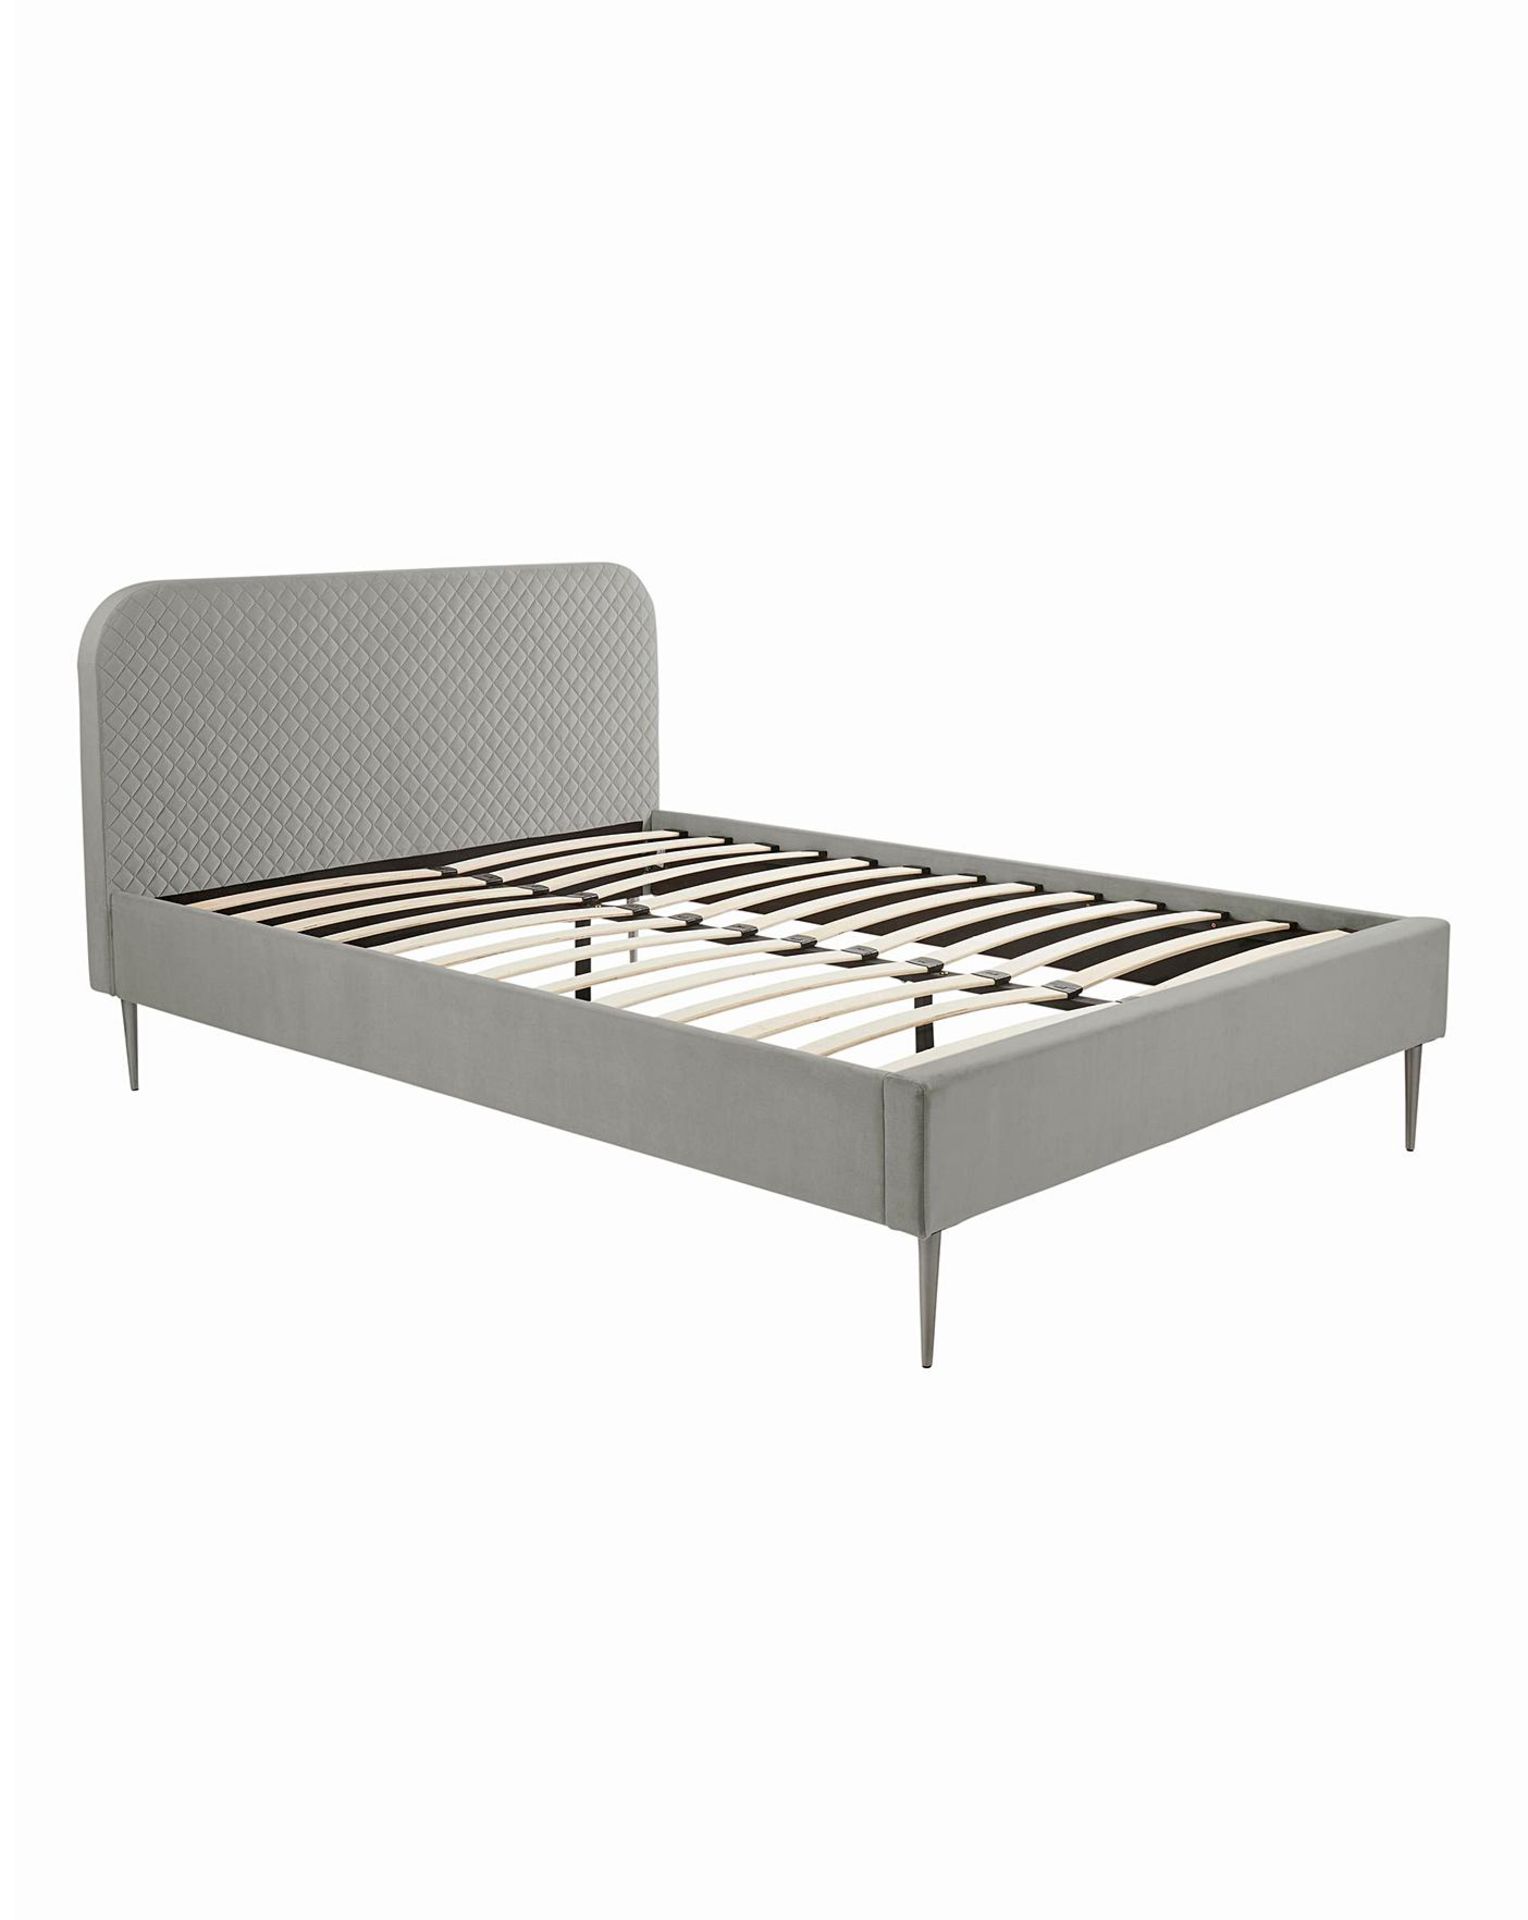 BRAND NEW ARDEN Quilted KINGSIZE Bed Frame. PEWTER. RRP £339 EACH. The Arden Quilted Bed is the - Bild 2 aus 2